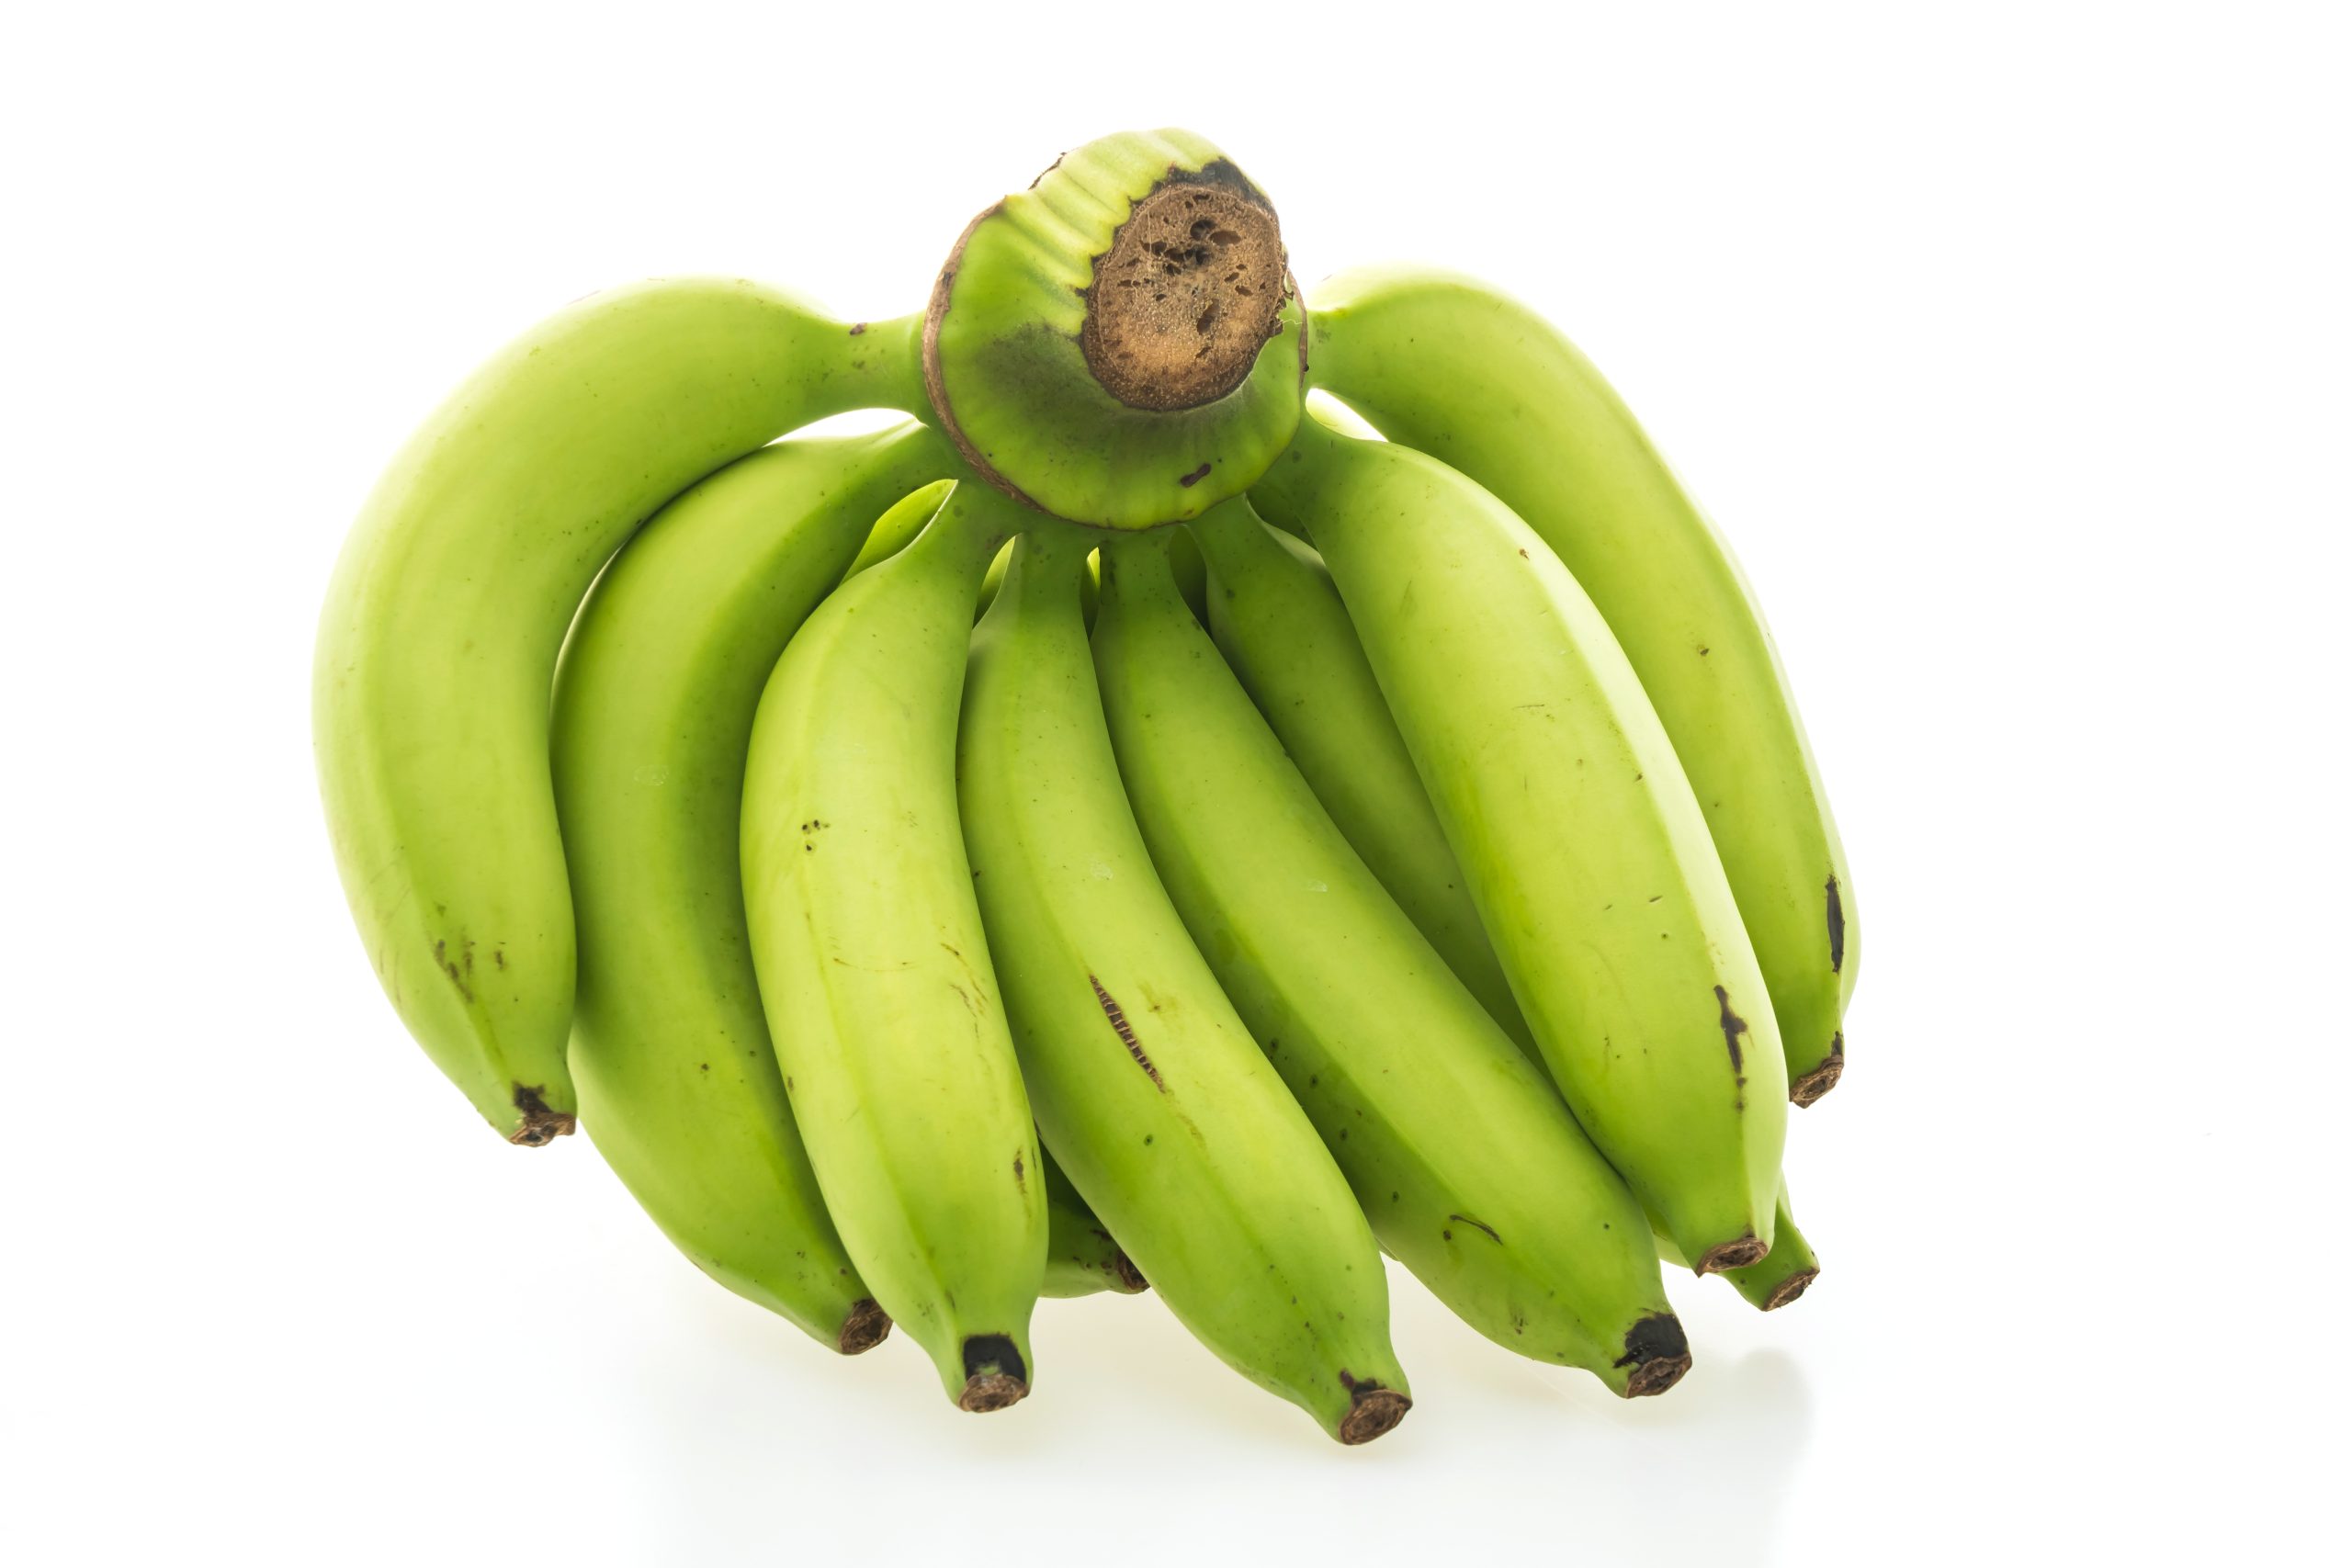 The healthy benefits of plantain